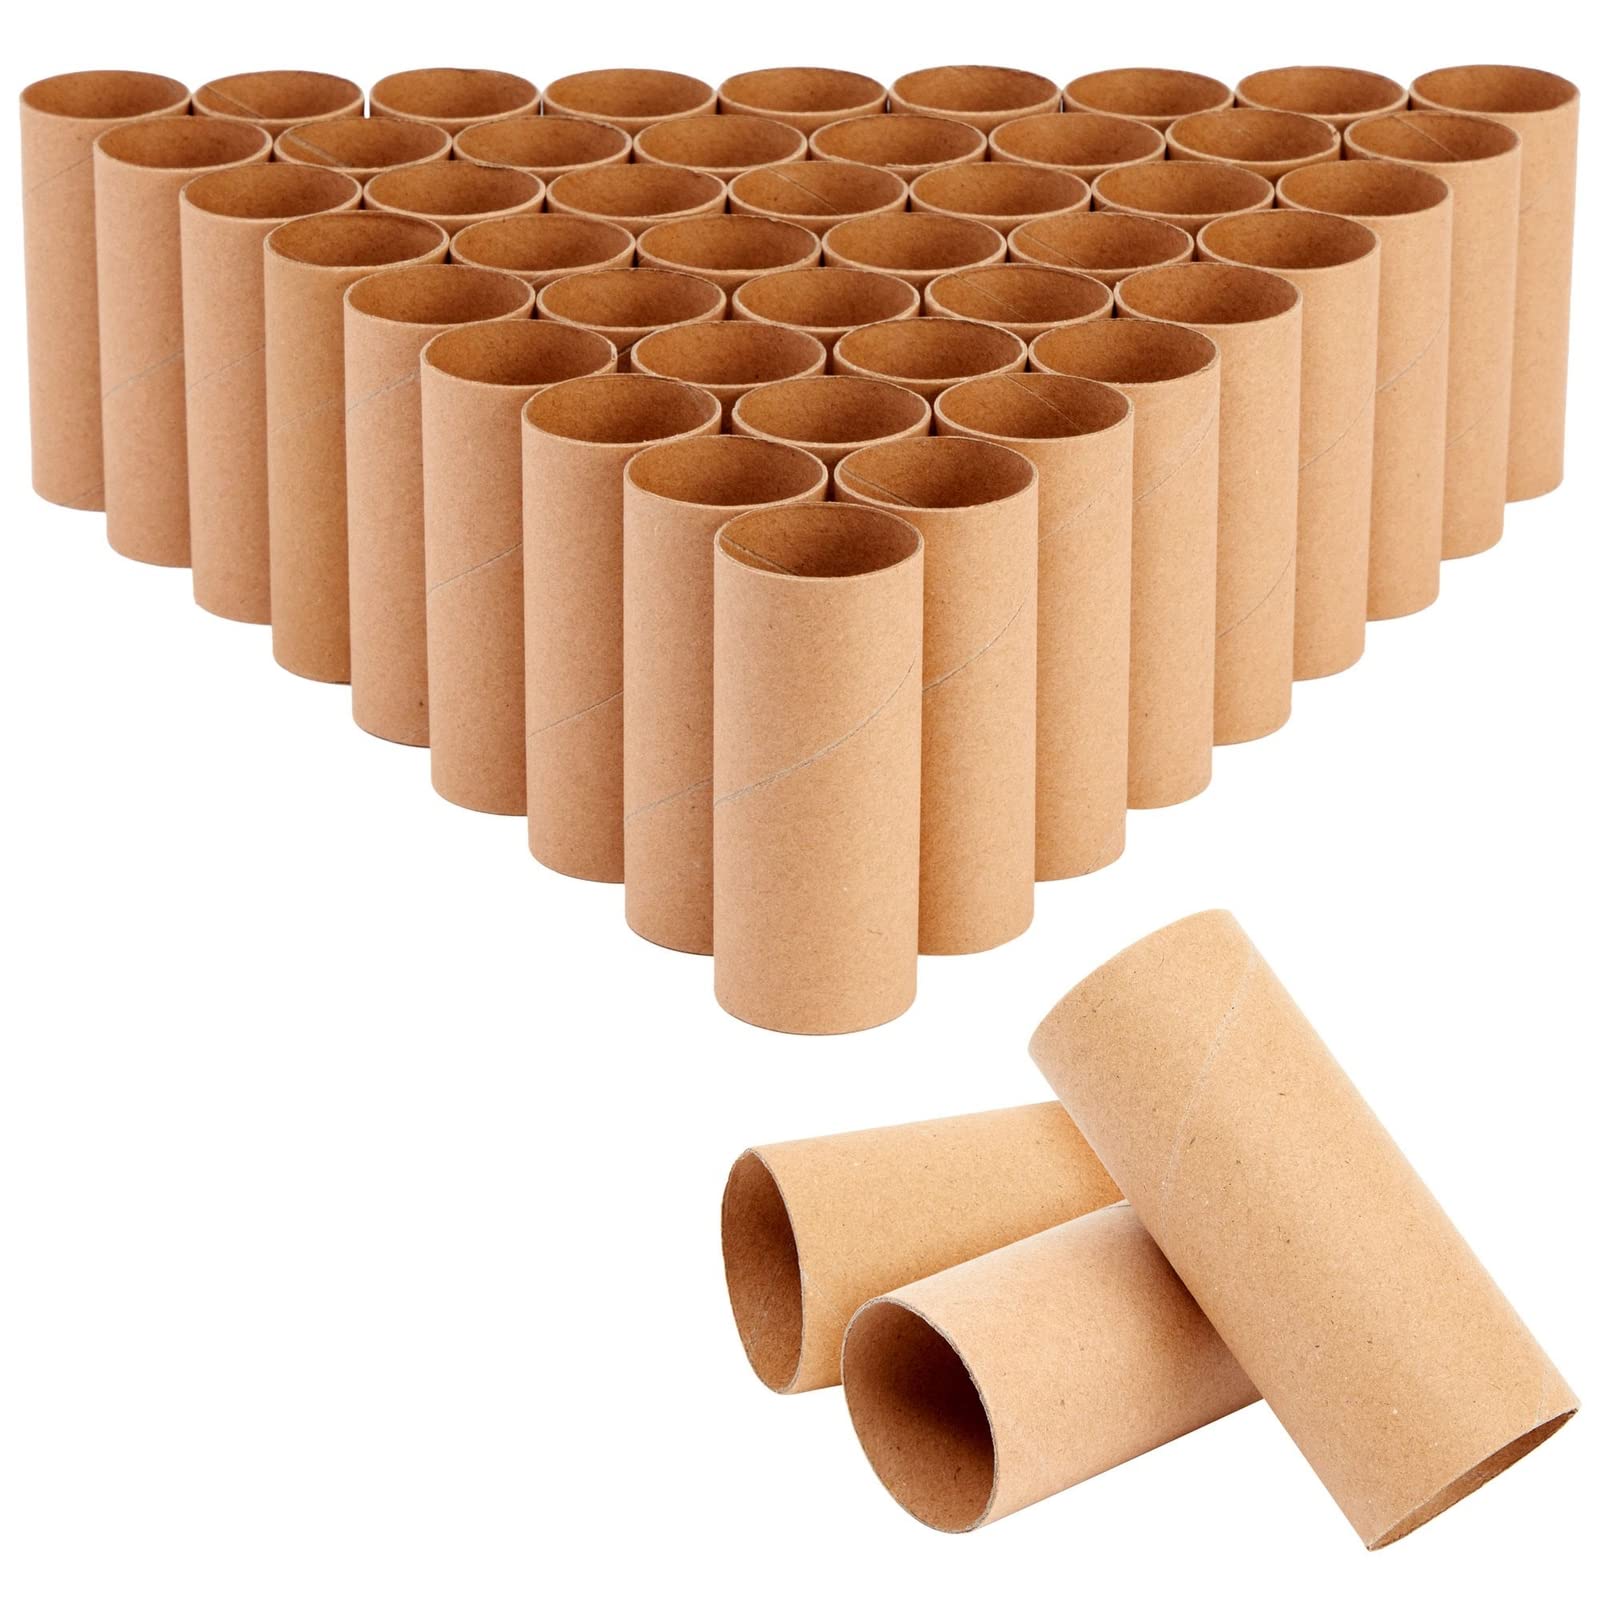 Toilet paper roll